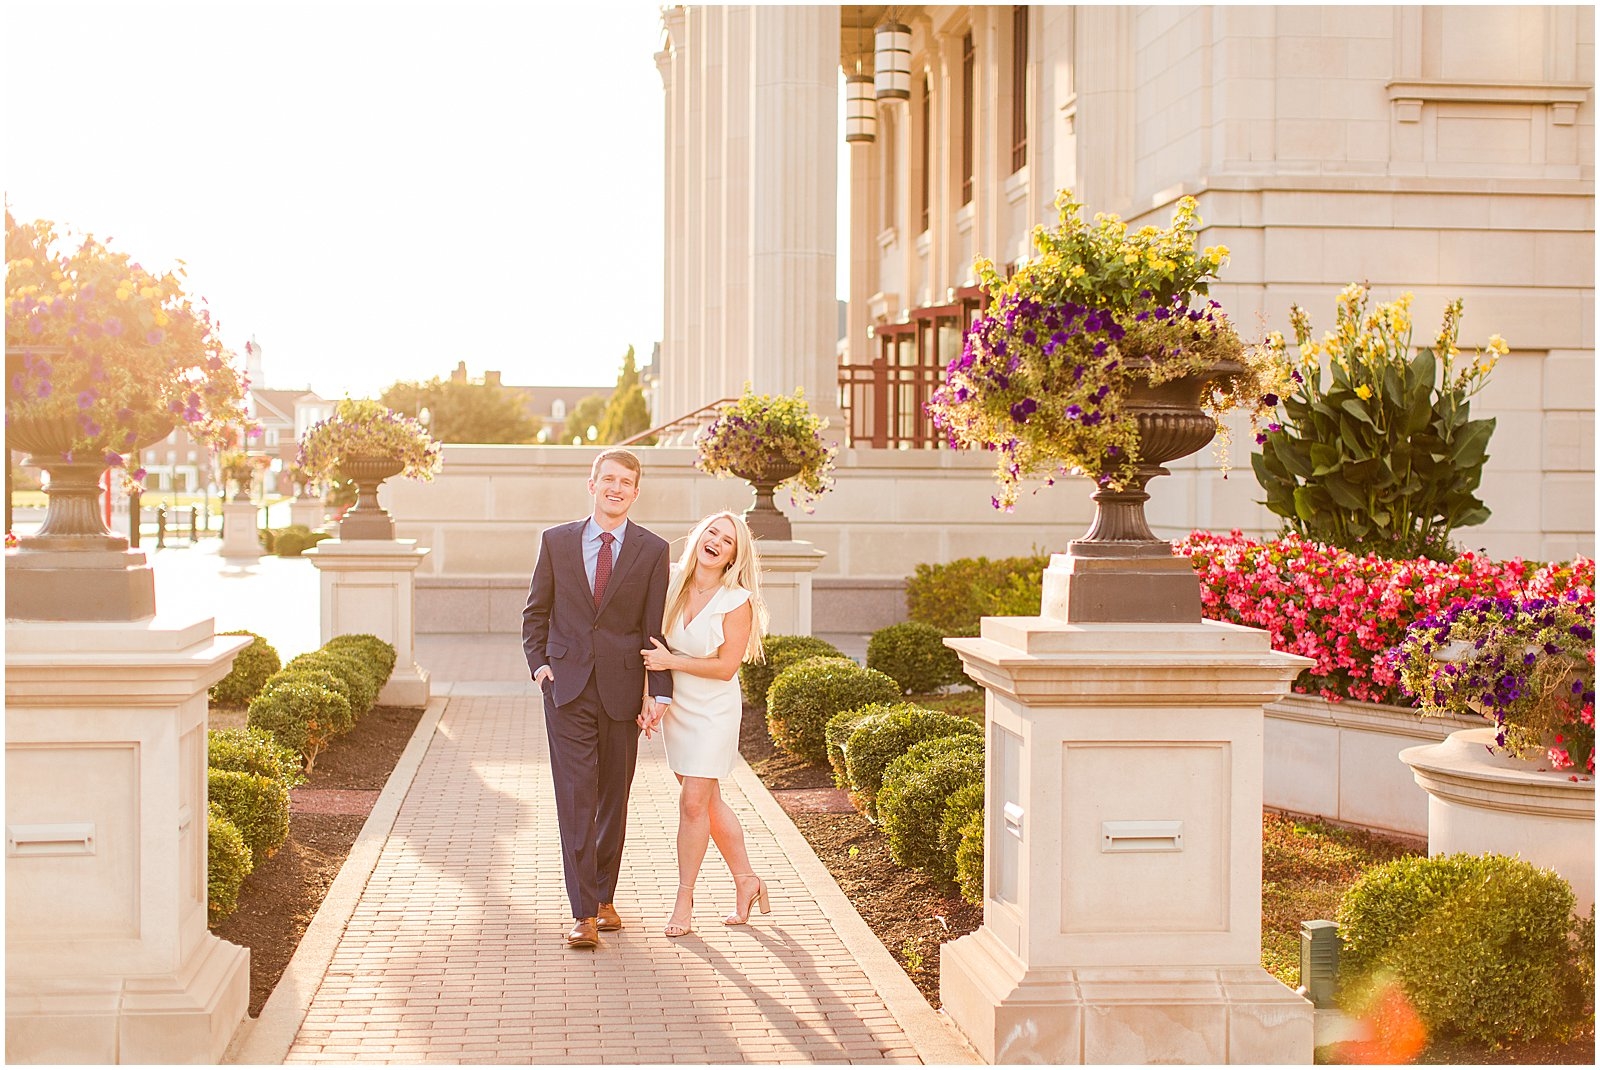 A Cute and Cuddly Engagement Session in Carmel, IN | Abbi and Josh0032.jpg